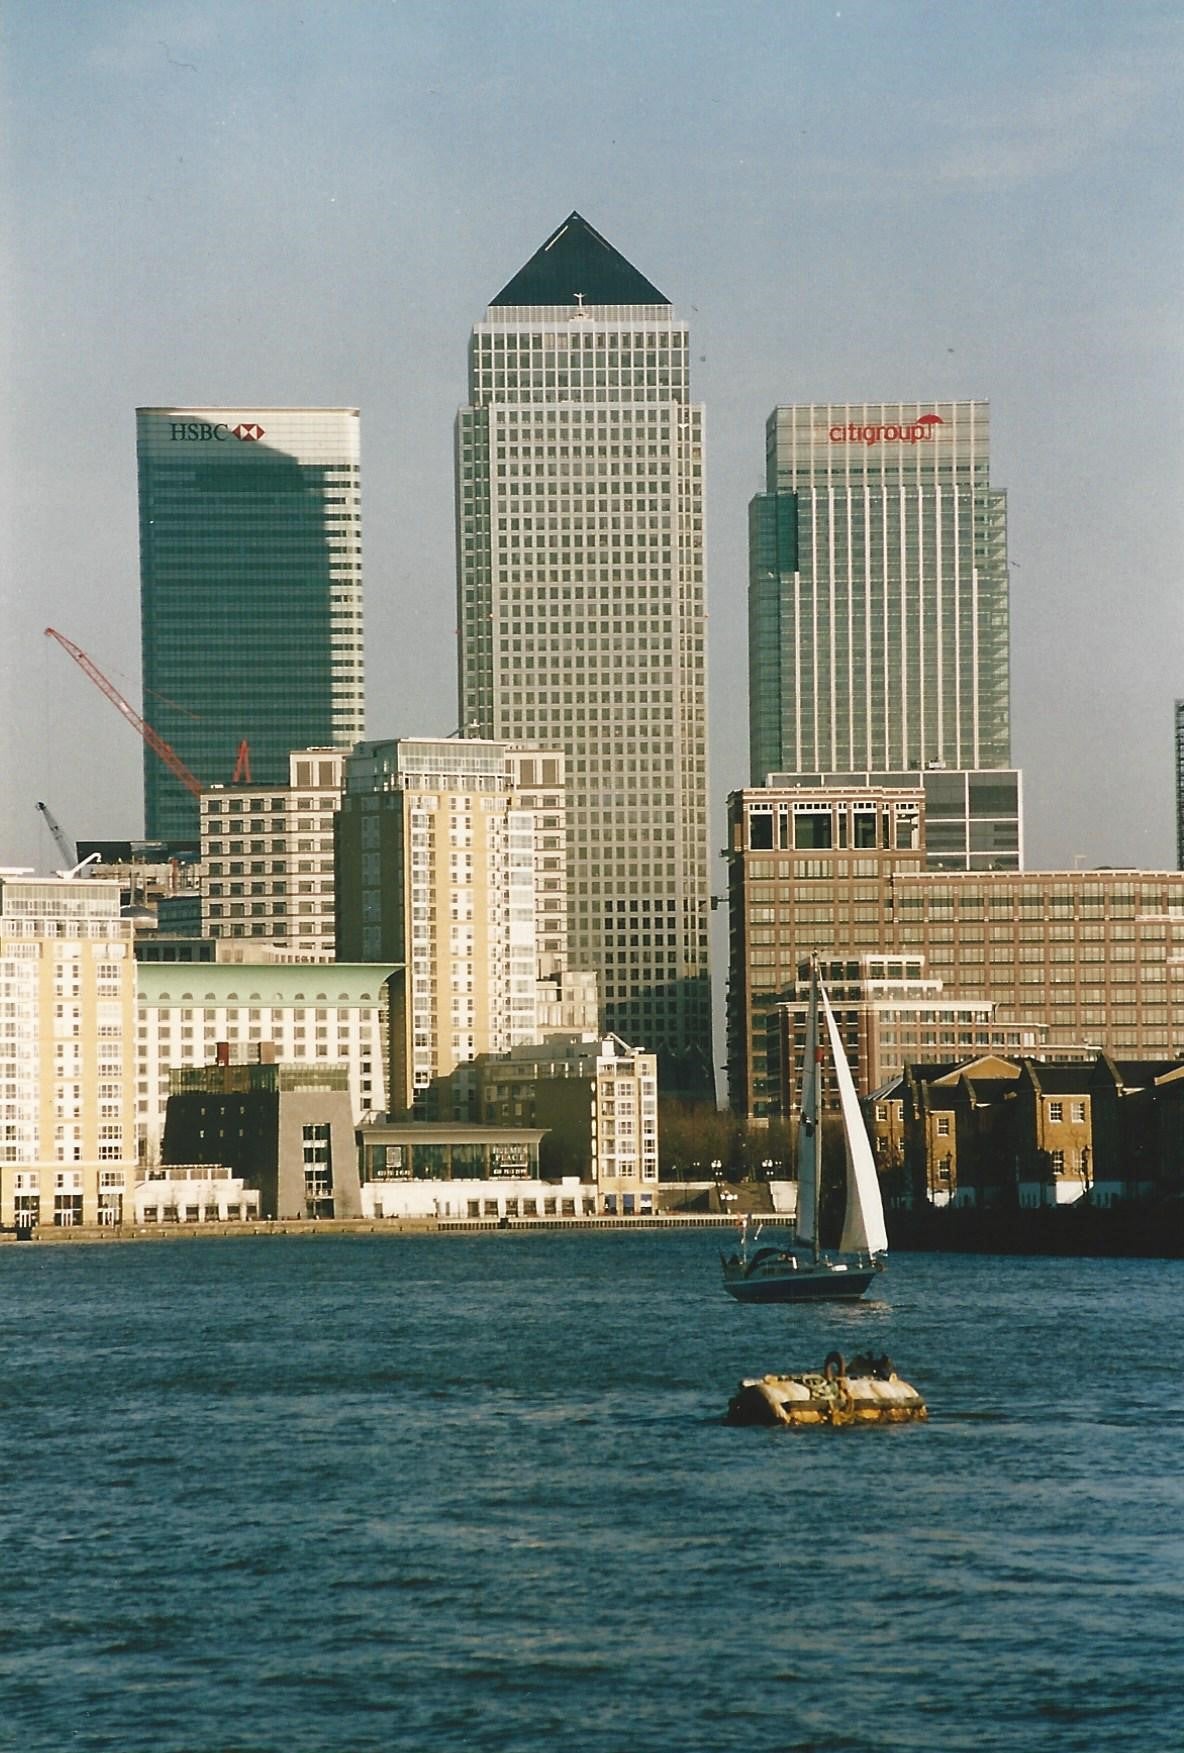 Canary Wharf and Yacht photograph Reginald Beer 2